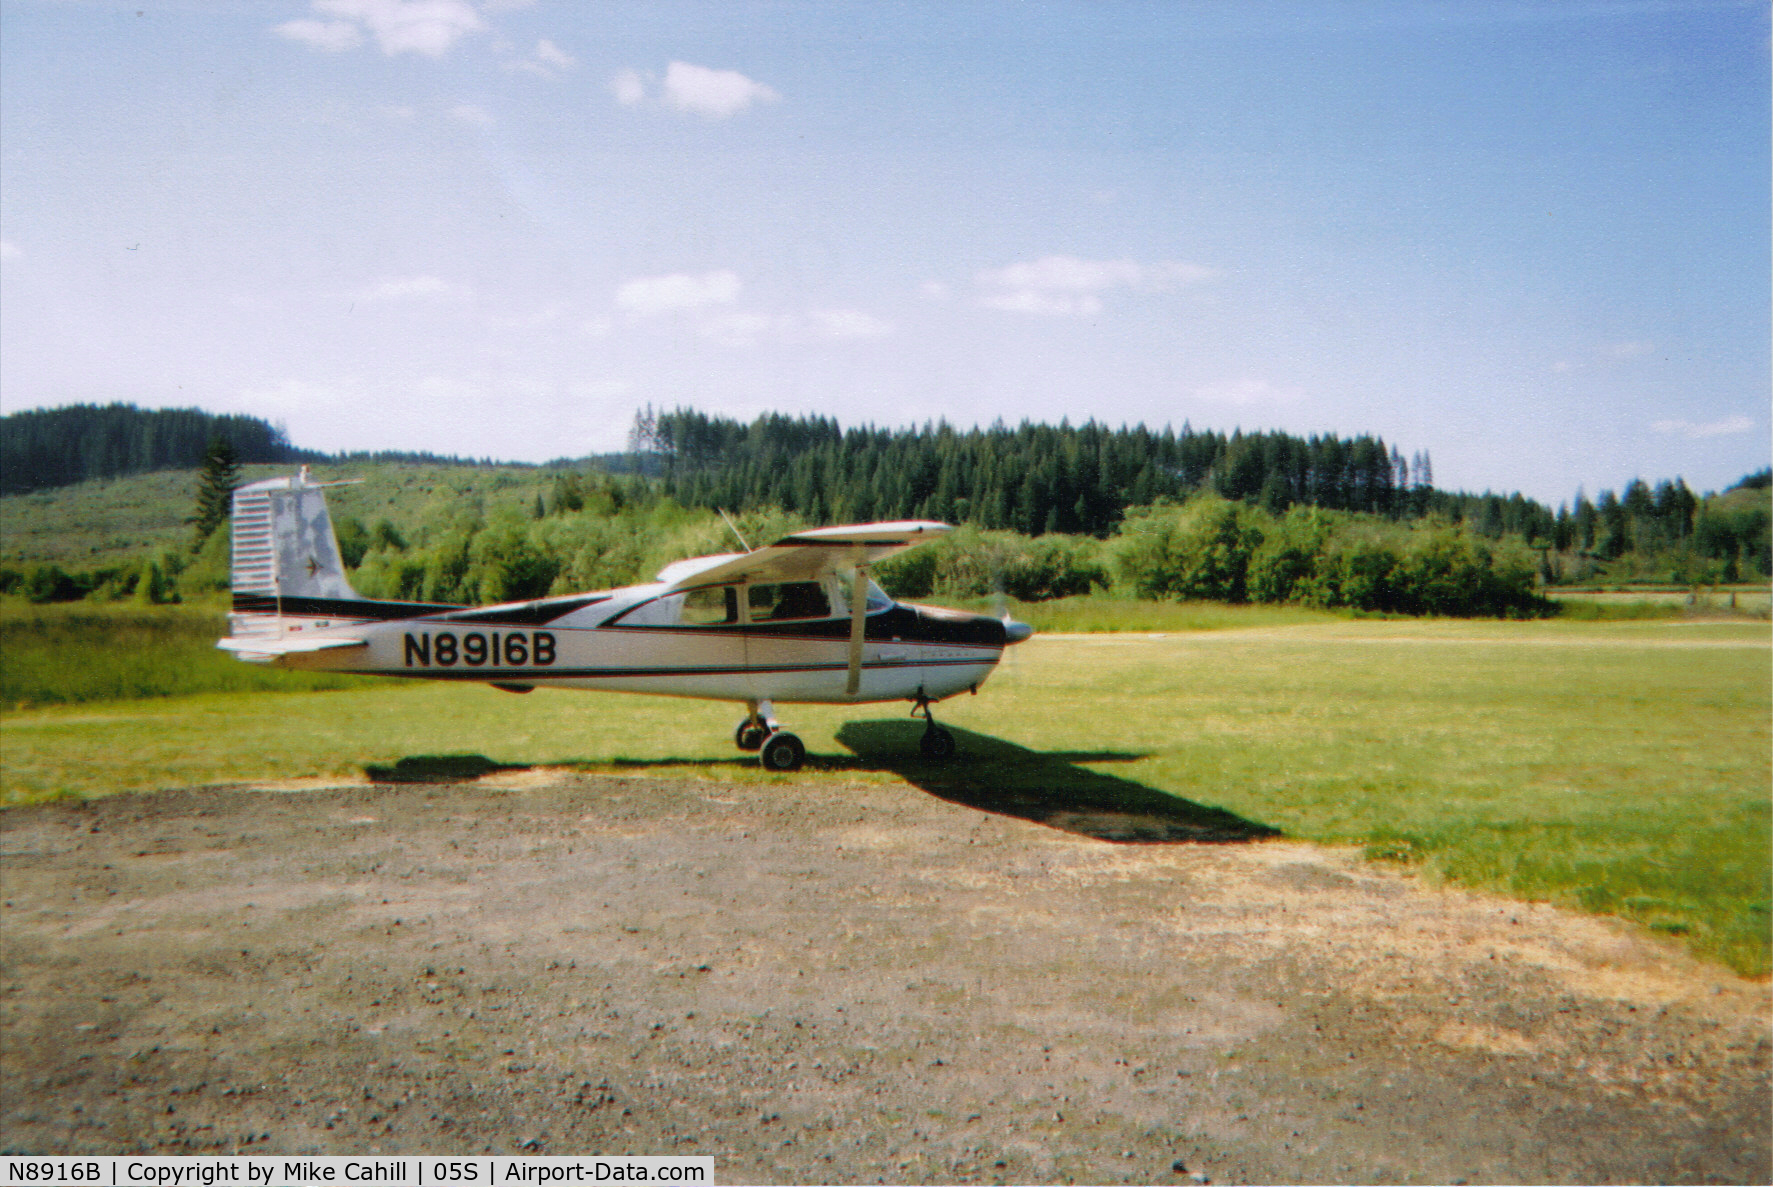 N8916B, 1958 Cessna 172 C/N 36716, April 2003 First flight after a month of A&P work at Vernonia, OR field. She flew well. She had sat on the field for a few years w/o being flown. Great help from Airport Manager Mike Seager.